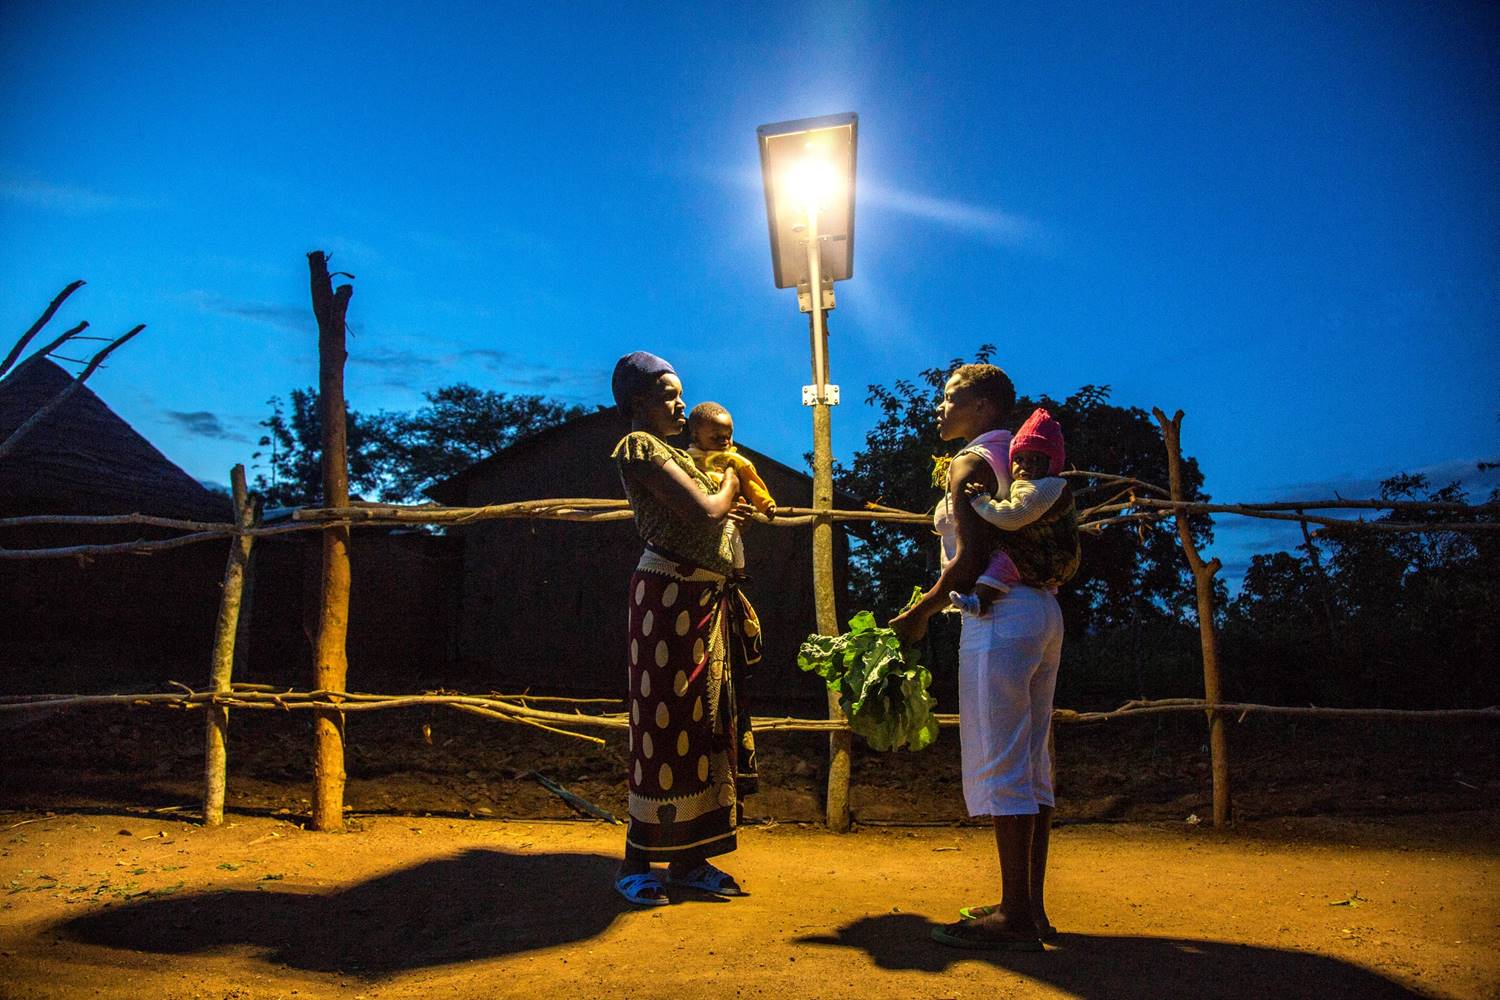 Where there is light, there is hope - how solar power can provide improved healthcare